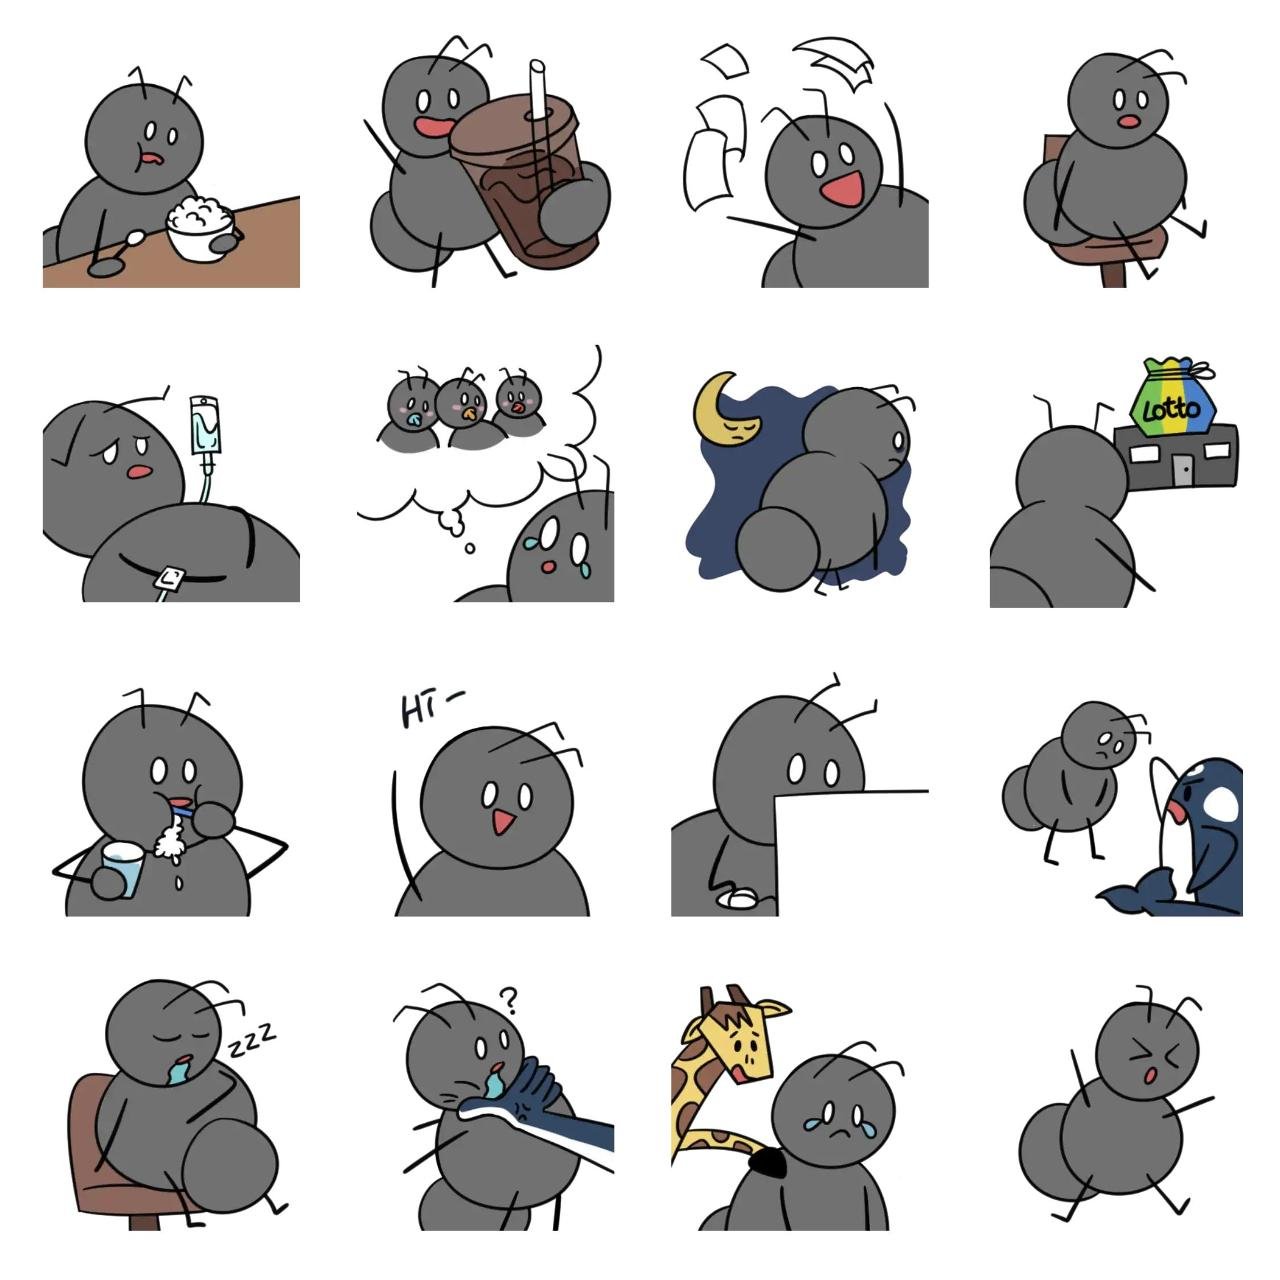 Ant Kim Animals sticker pack for Whatsapp, Telegram, Signal, and others chatting and message apps